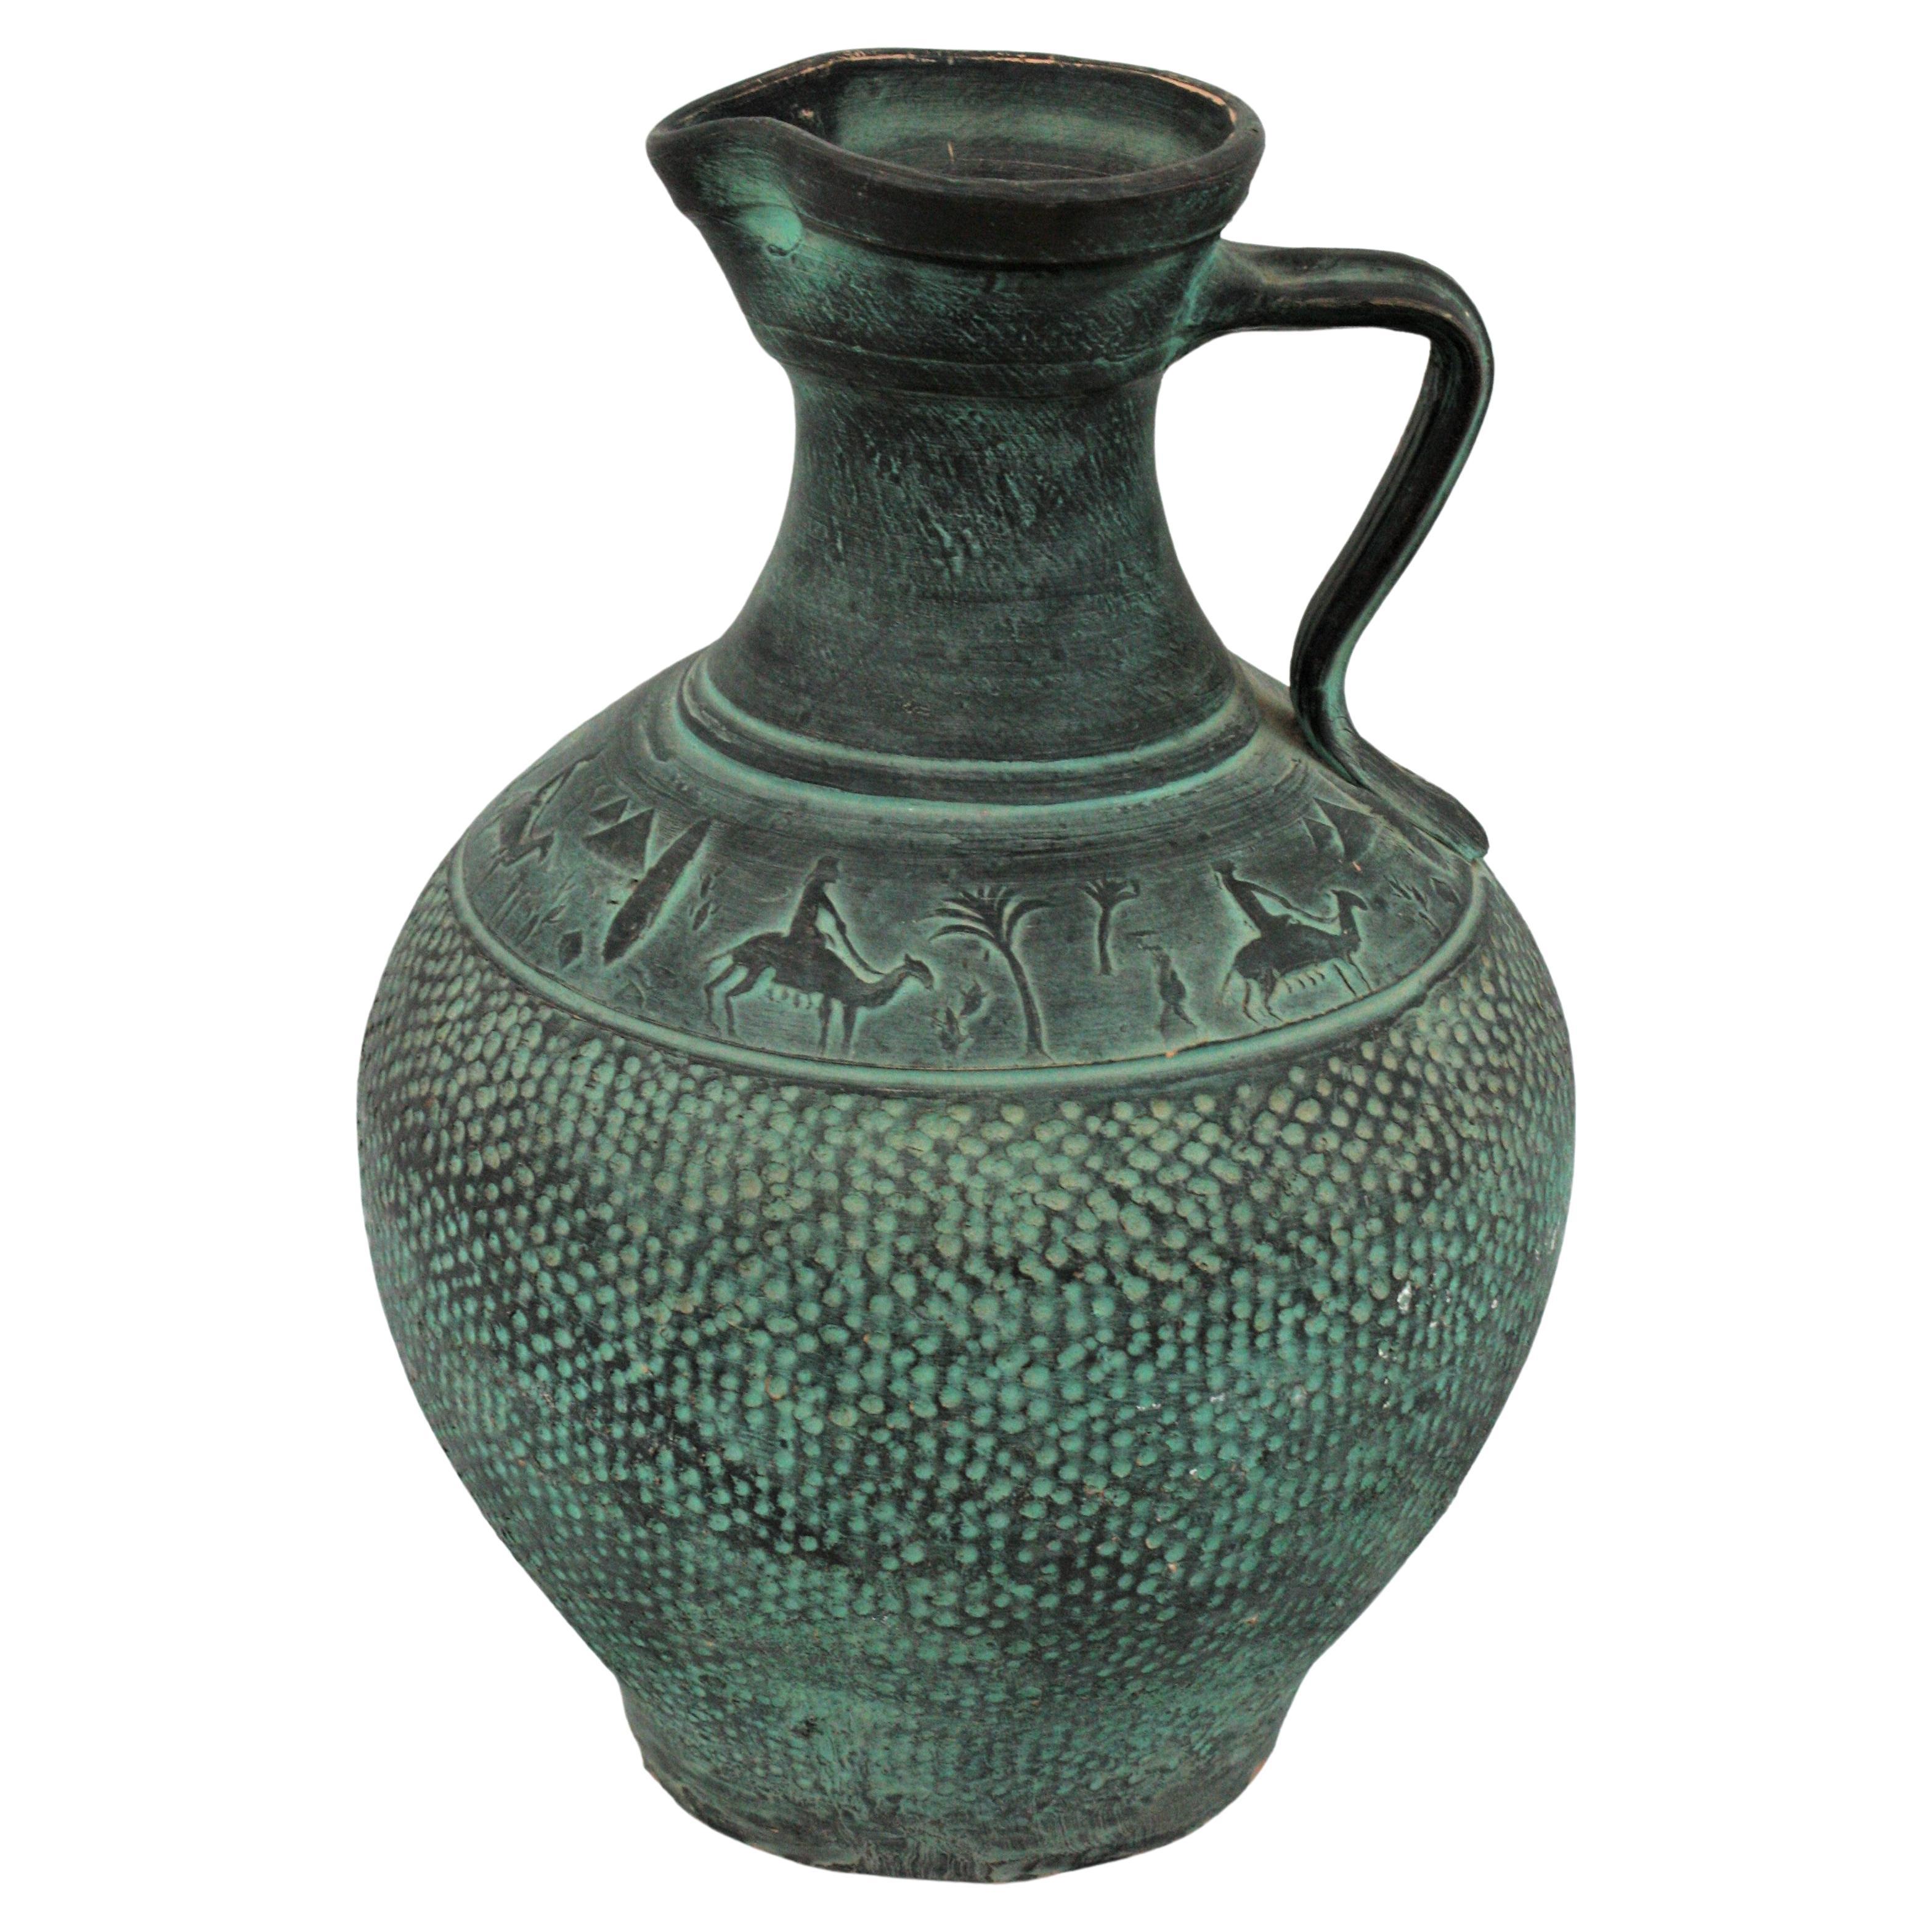 Large jug or vessel in green unglazed terracotta. Catalonia, Spain, 1950s
This outstanding jar vase has engraved dot details thorough the body and beautiful egyptian decor. Single handle at one side.
This mid-century jug has a design inspired in